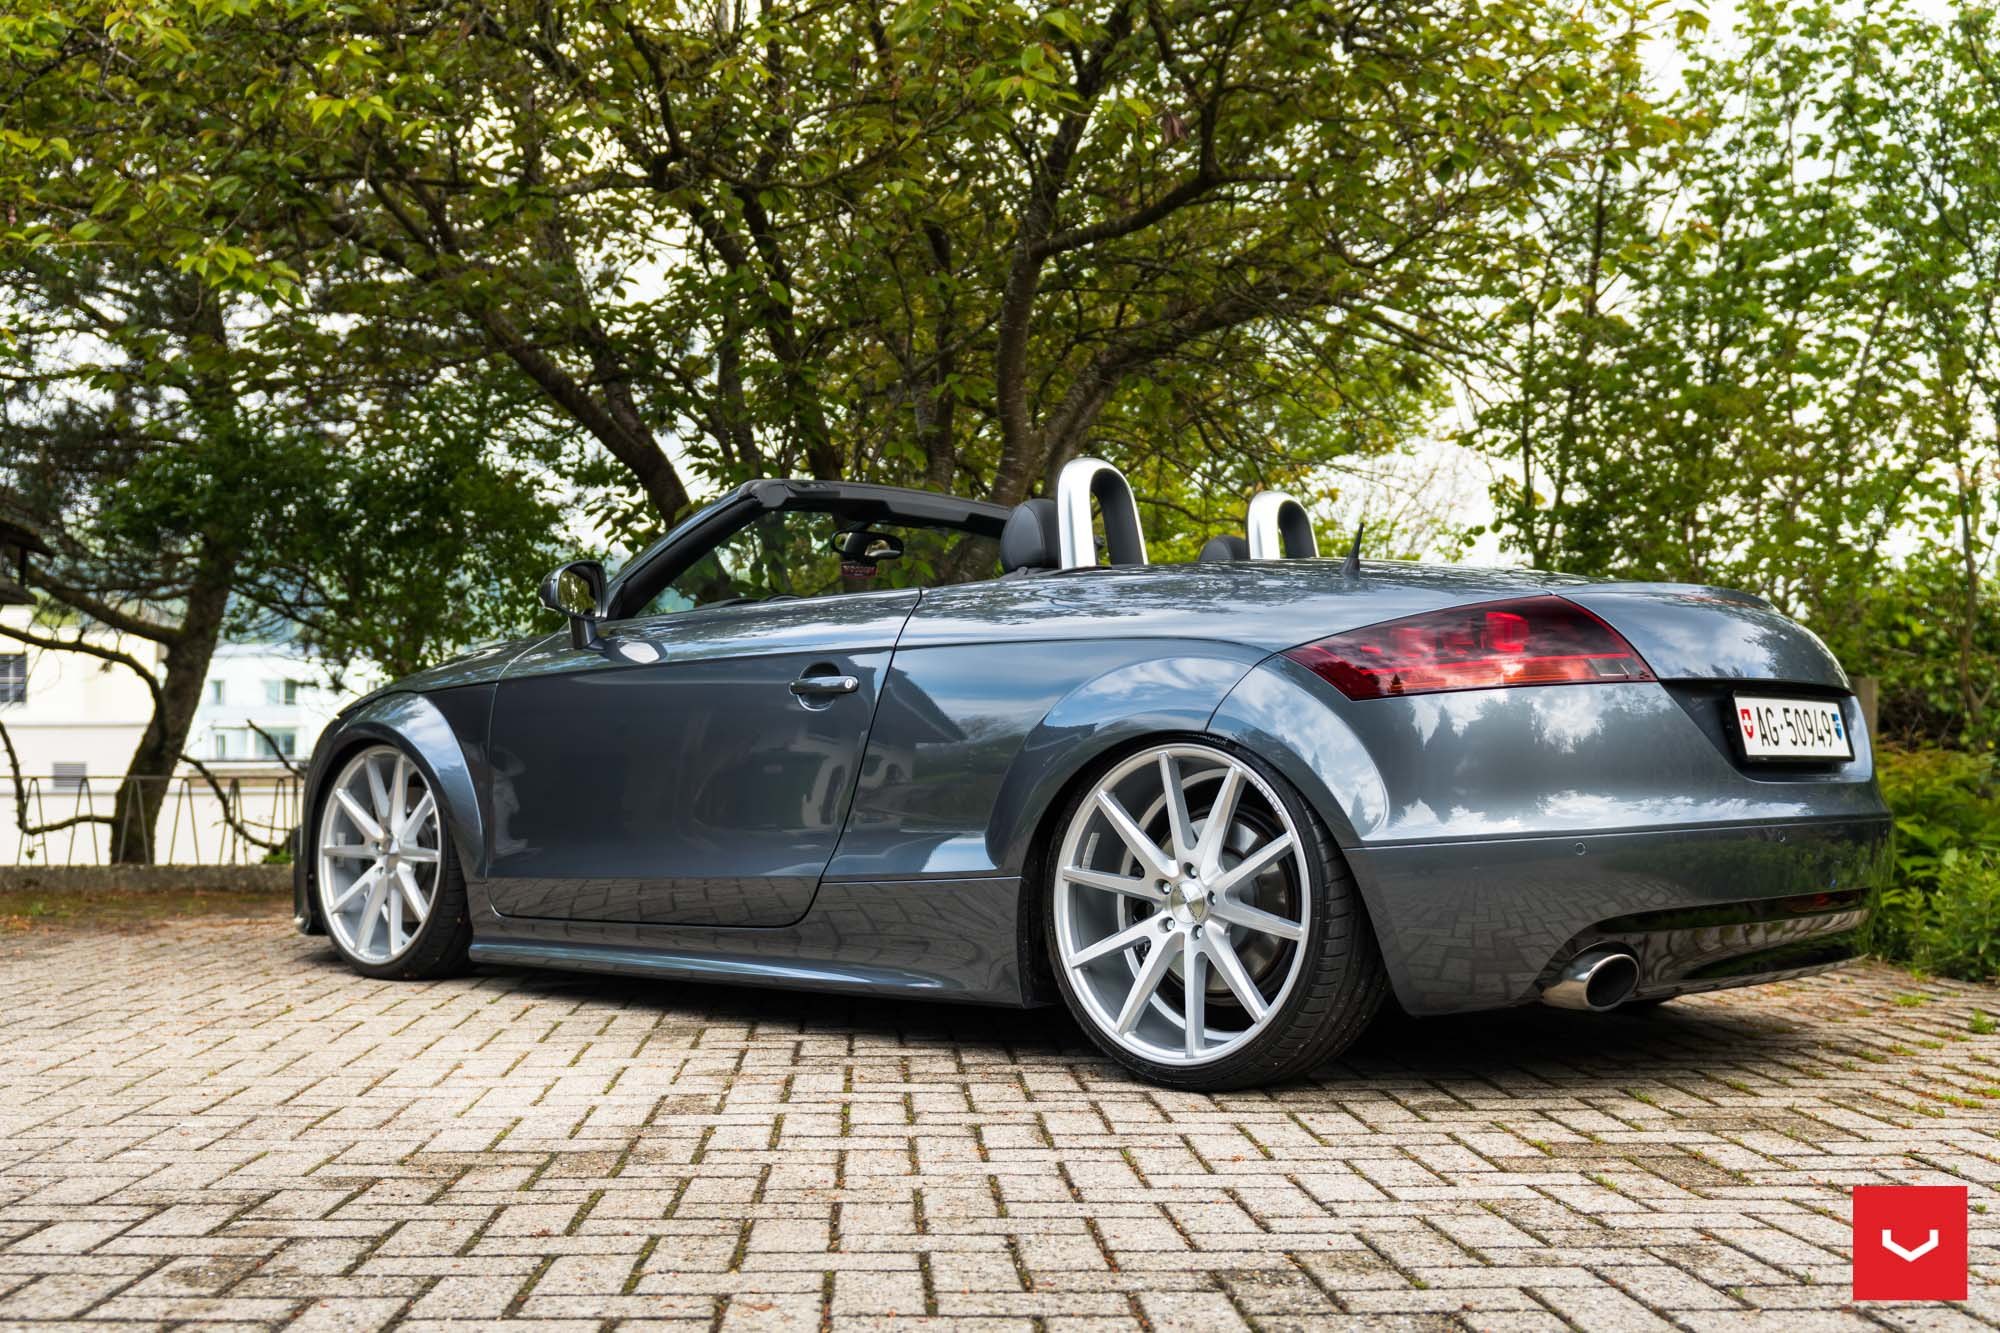 Aftermarket Rear Diffuser on Convertible Audi TT - Photo by Vossen